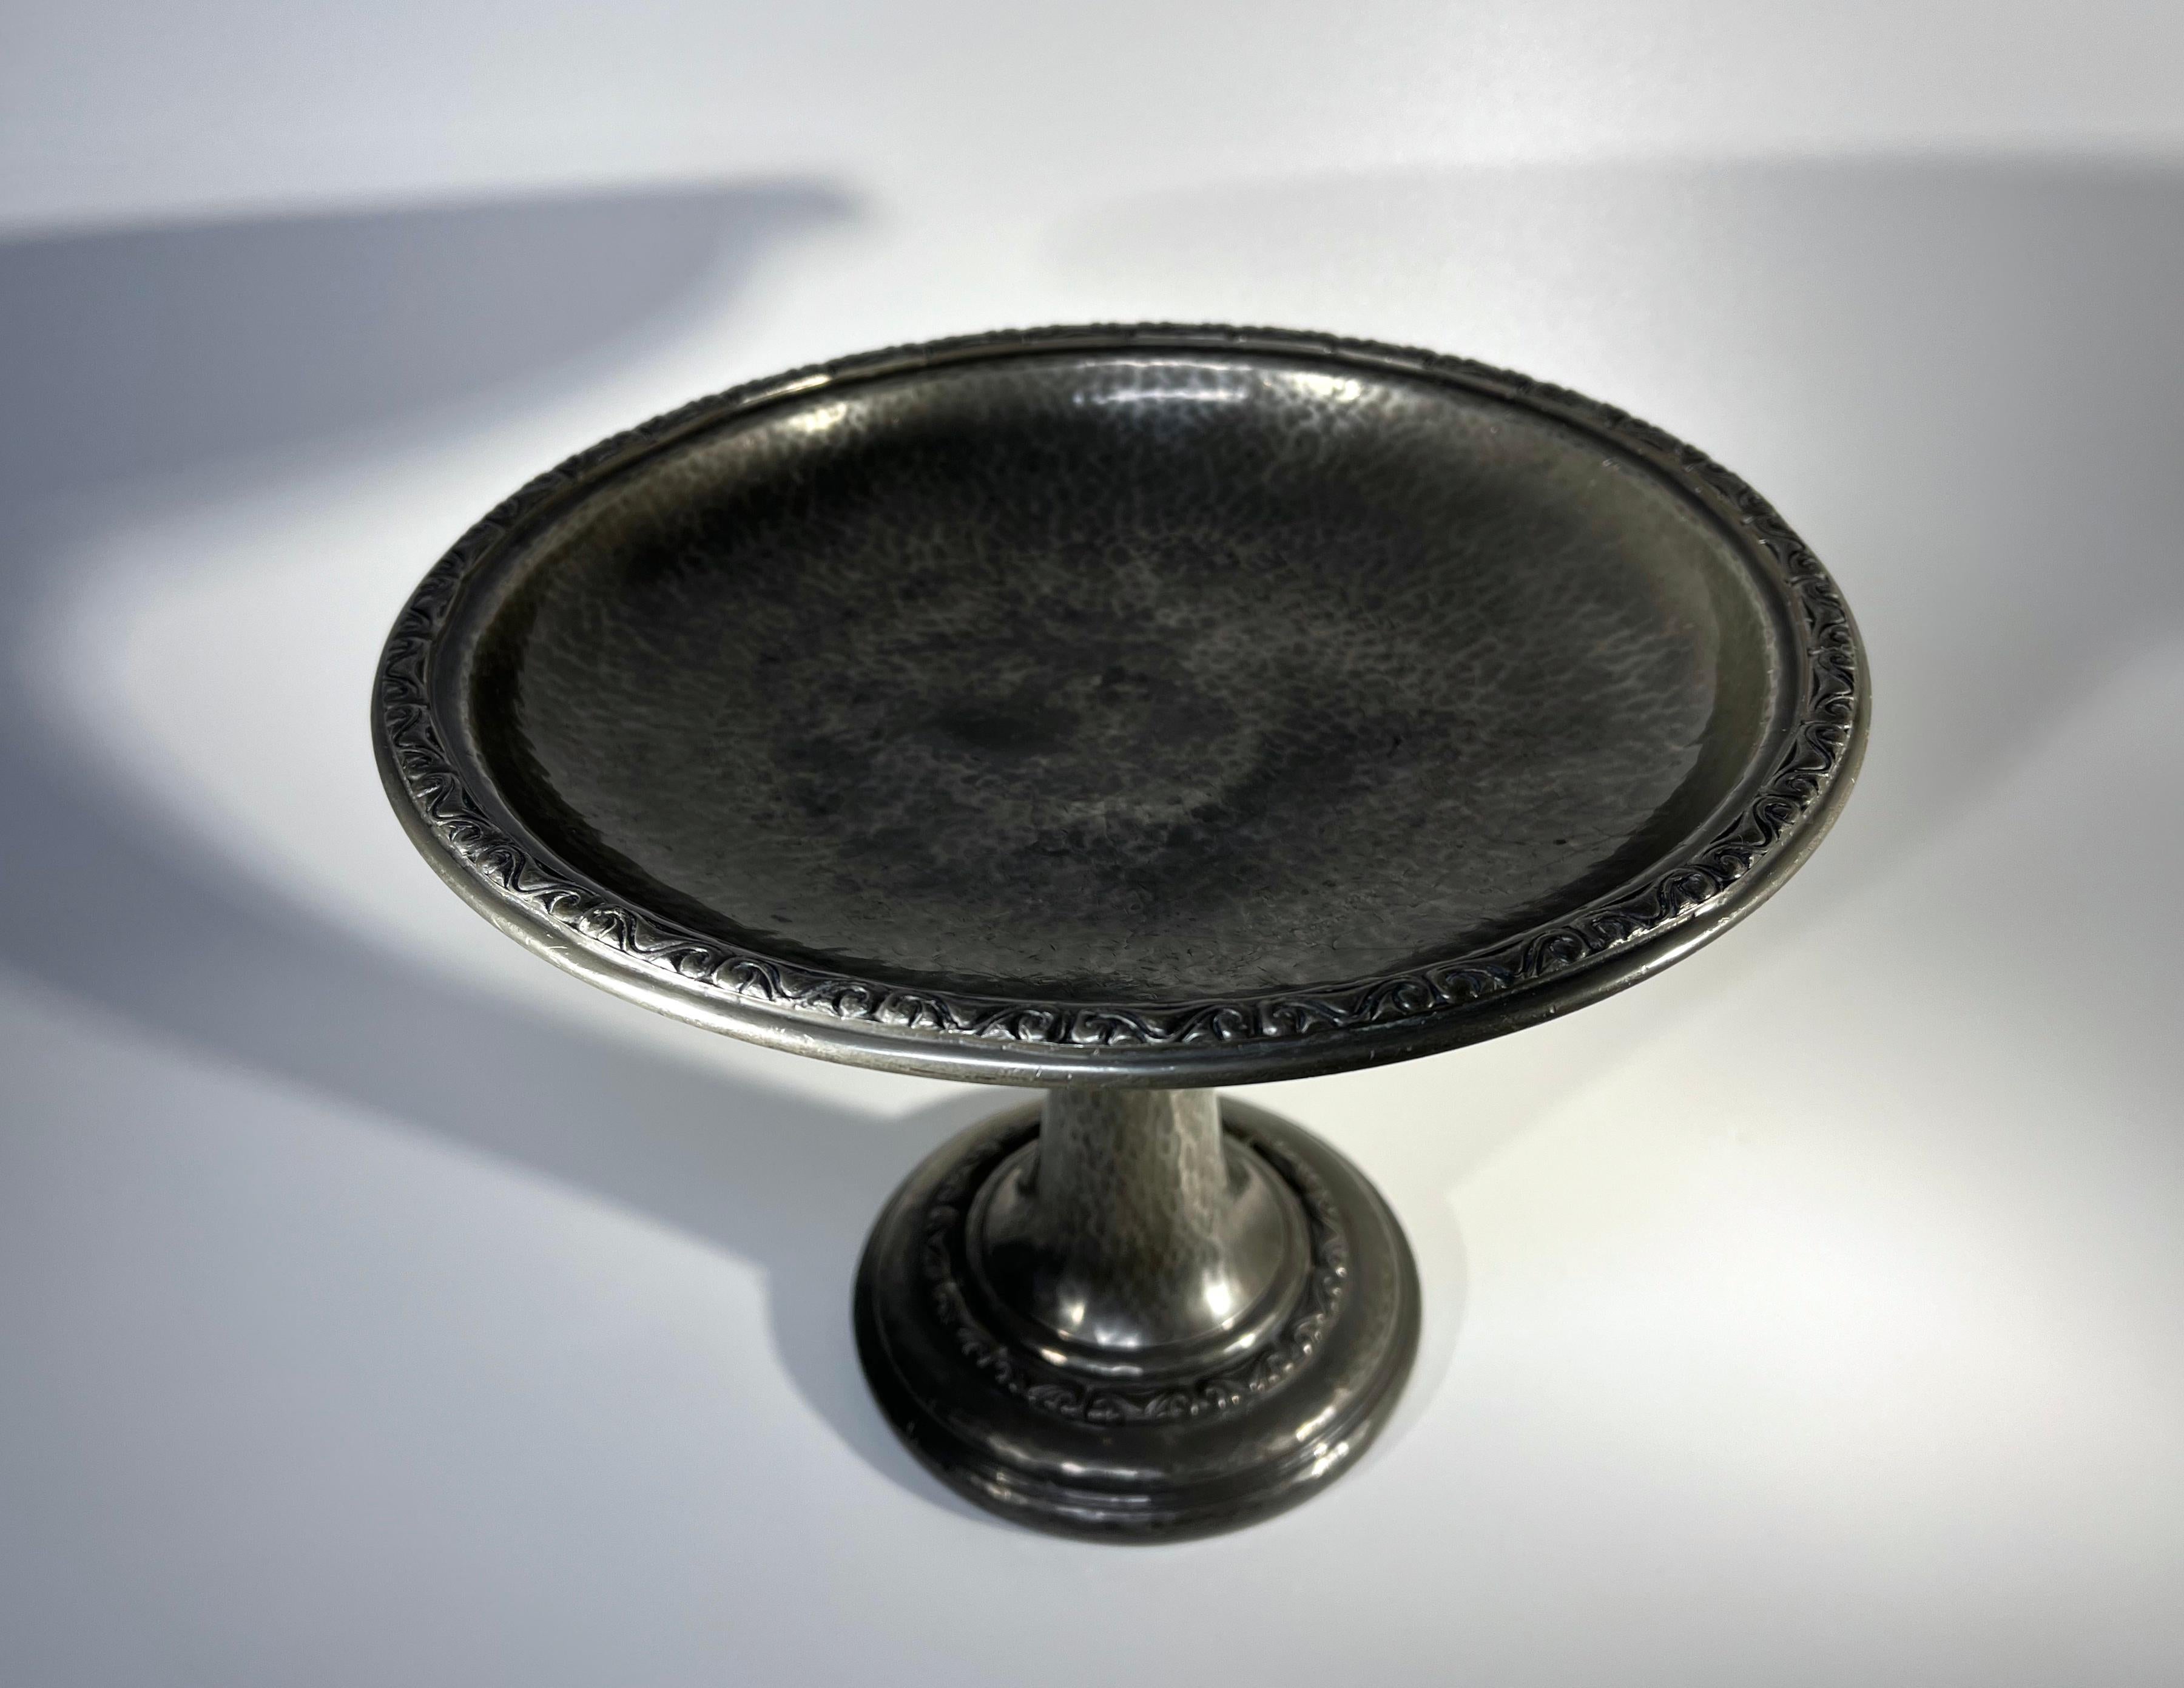 English Art Nouveau, Liberty & Co., Tudric Hammered Antique Pewter Tazza c1910 For Sale